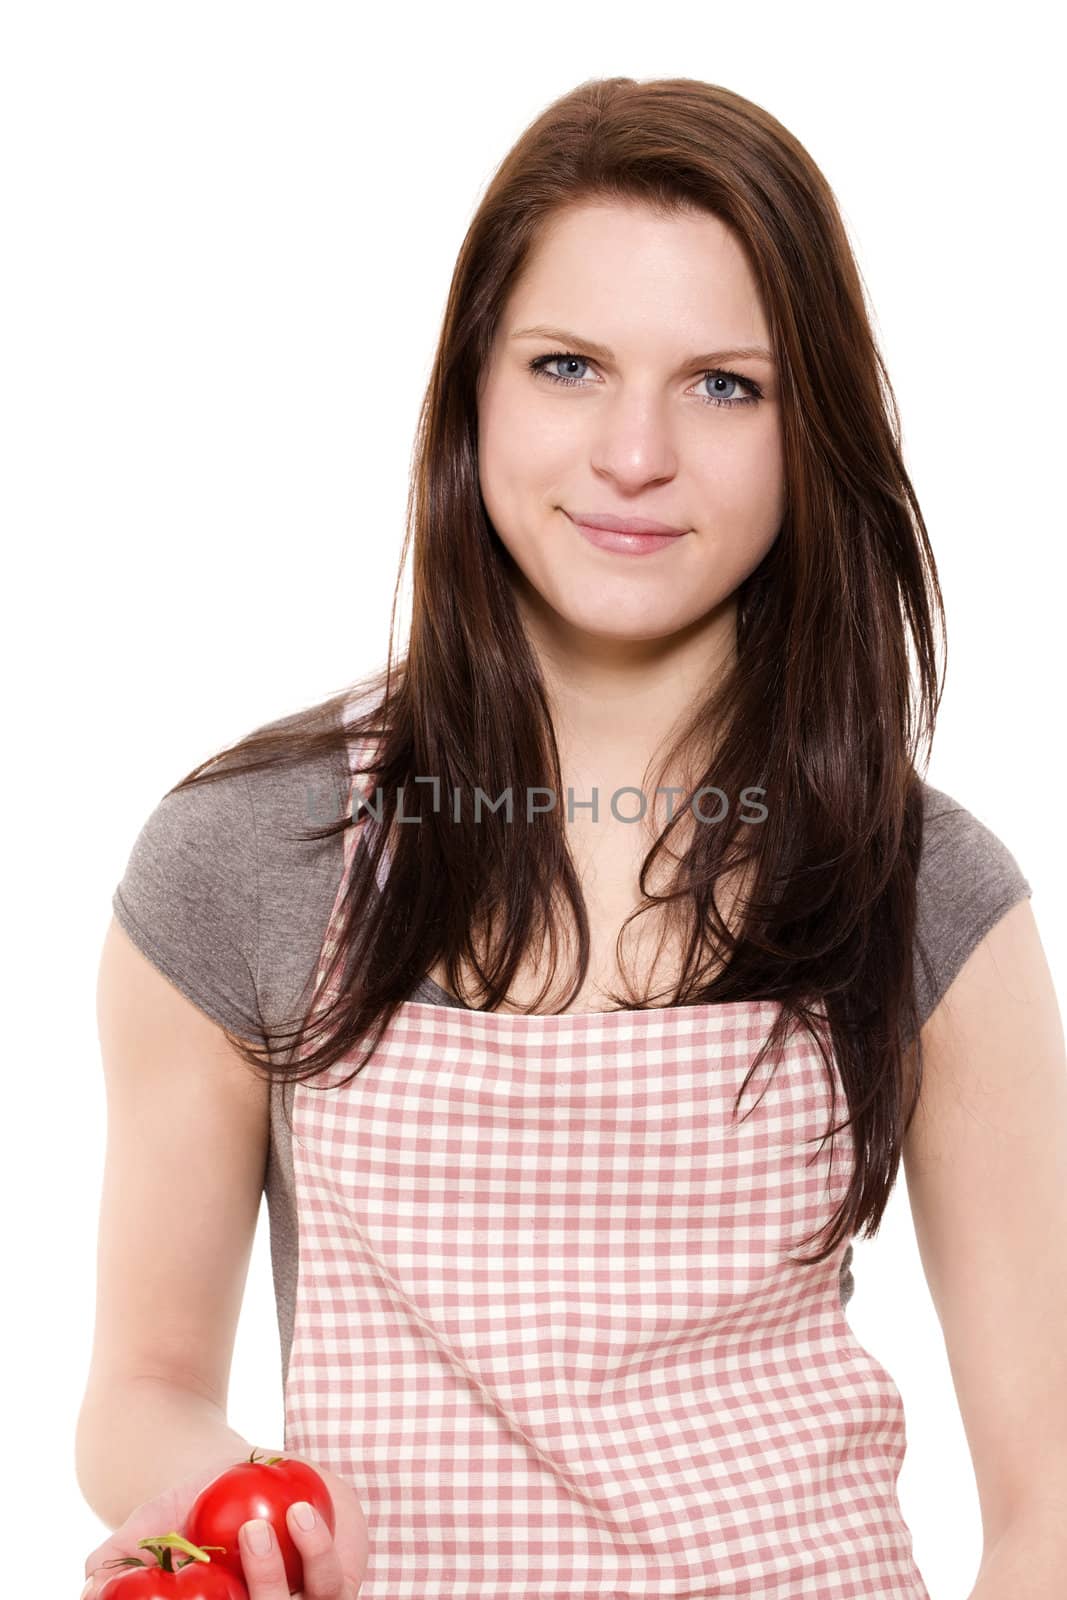 portrait of a smiling young woman with red apron holding tomatoes on white background